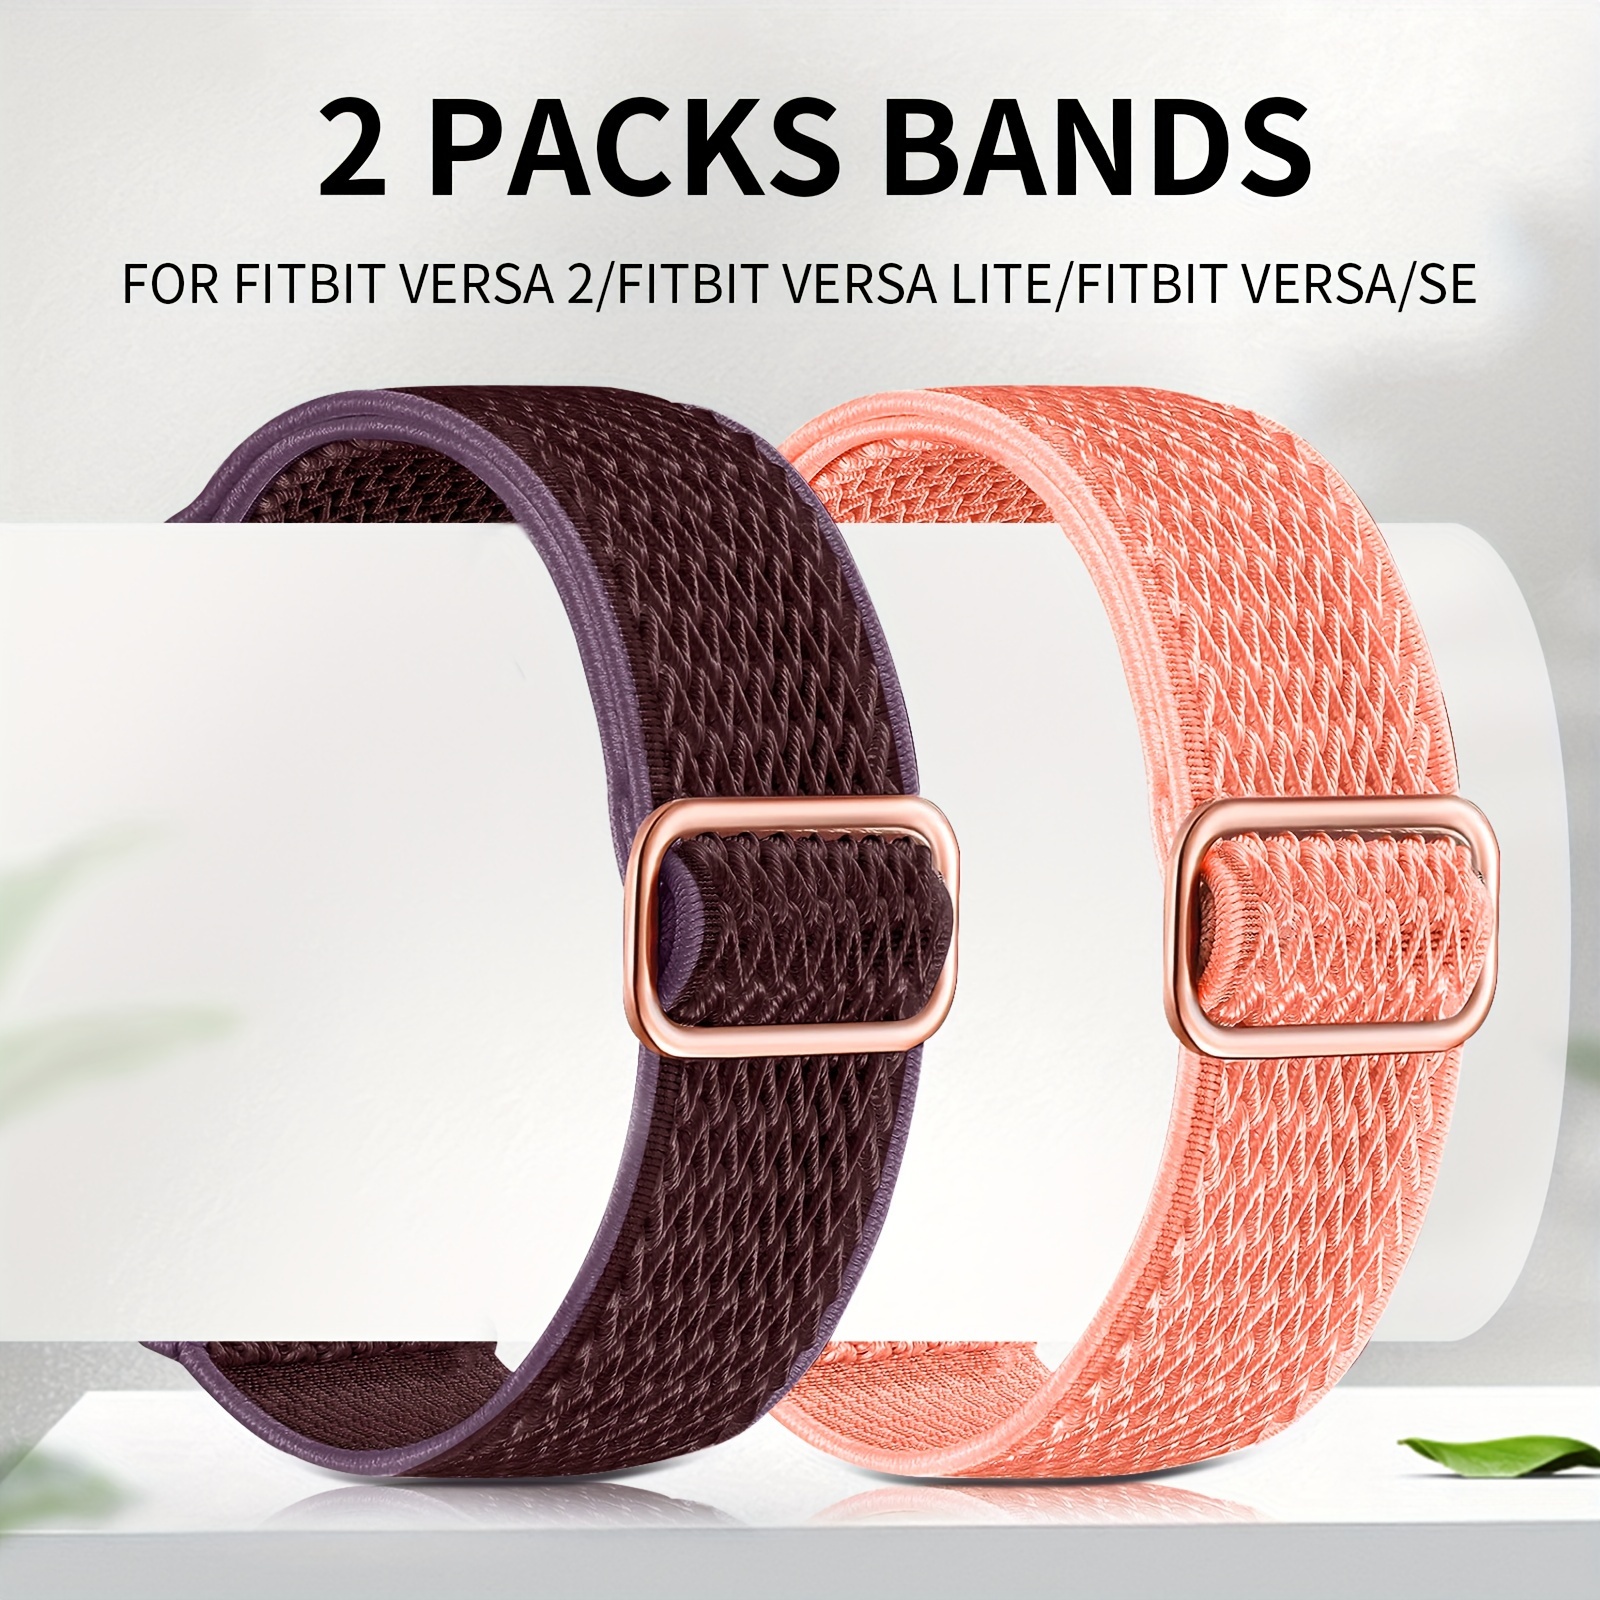  6 Pack Sport Bands Compatible with Fitbit Versa 2 / Versa/Versa  Lite/Versa SE, Classic Soft Silicone Replacement Wristbands for Smart Watch  Women Men (6 Pack A, Small) : Electronics